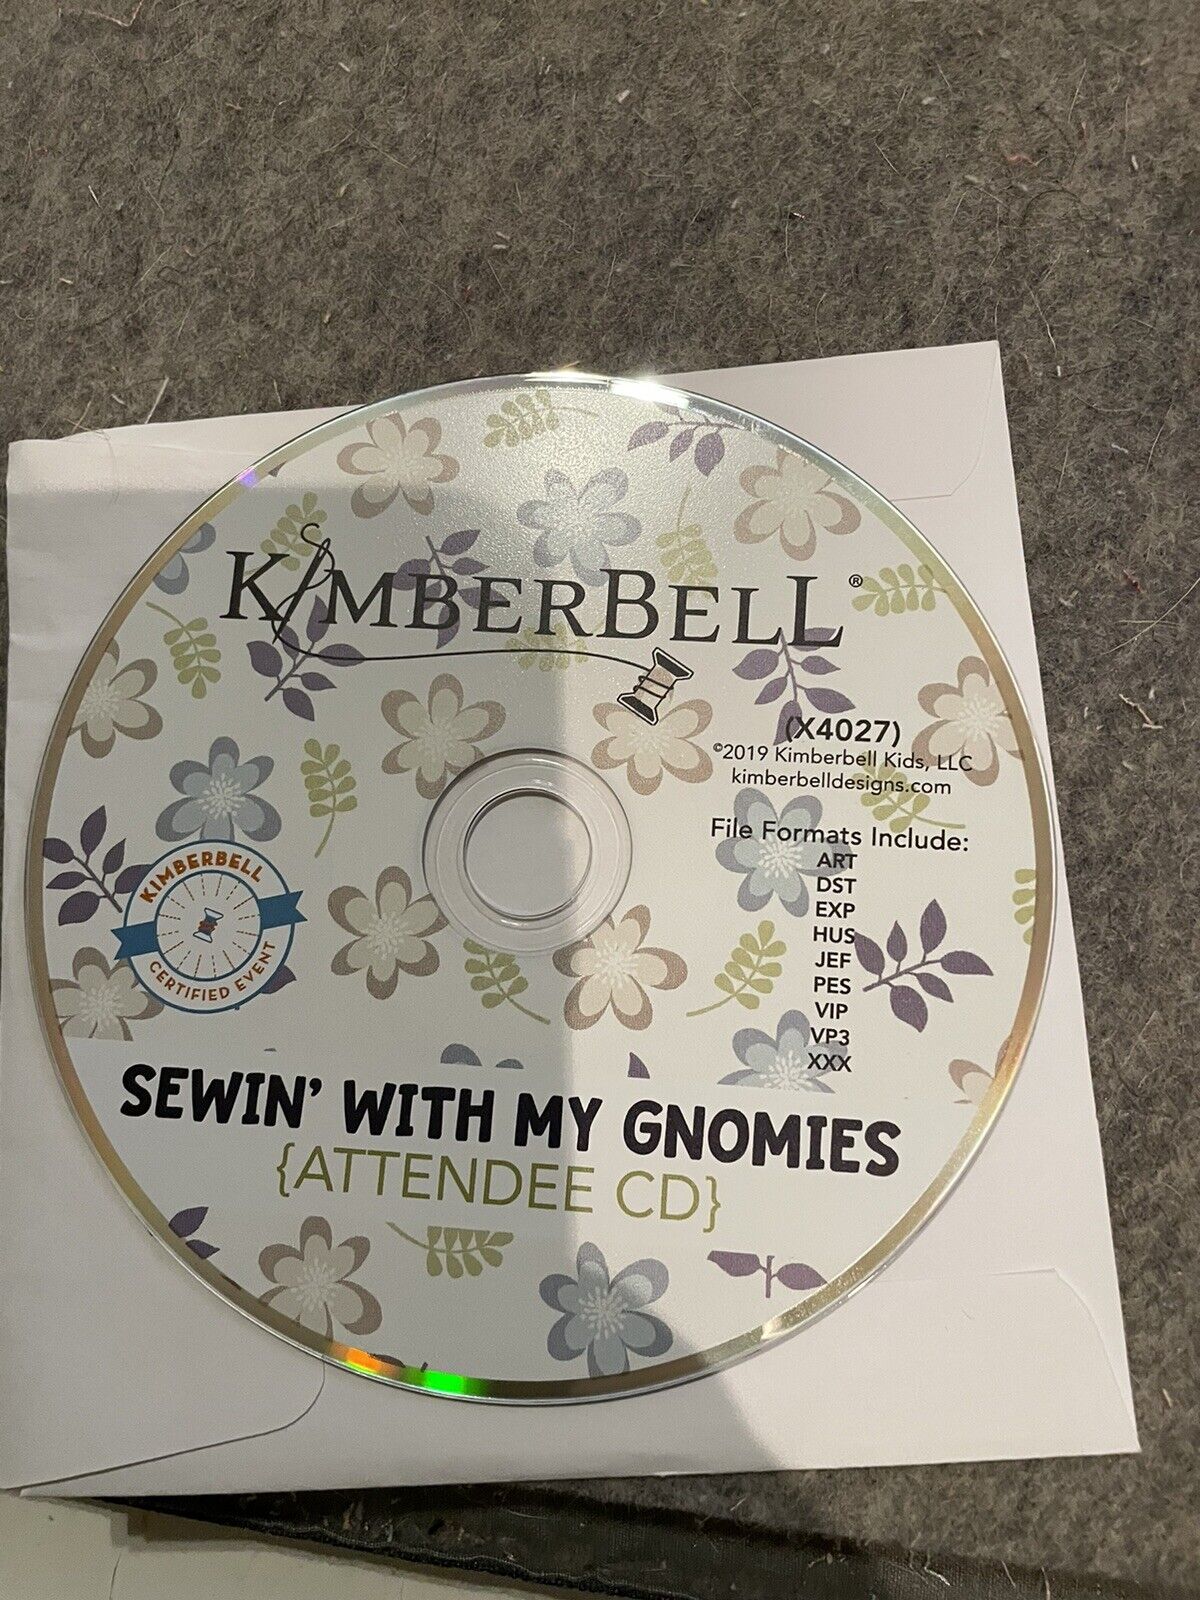 Kimberbell Sewing With My Gnomies Event Cd